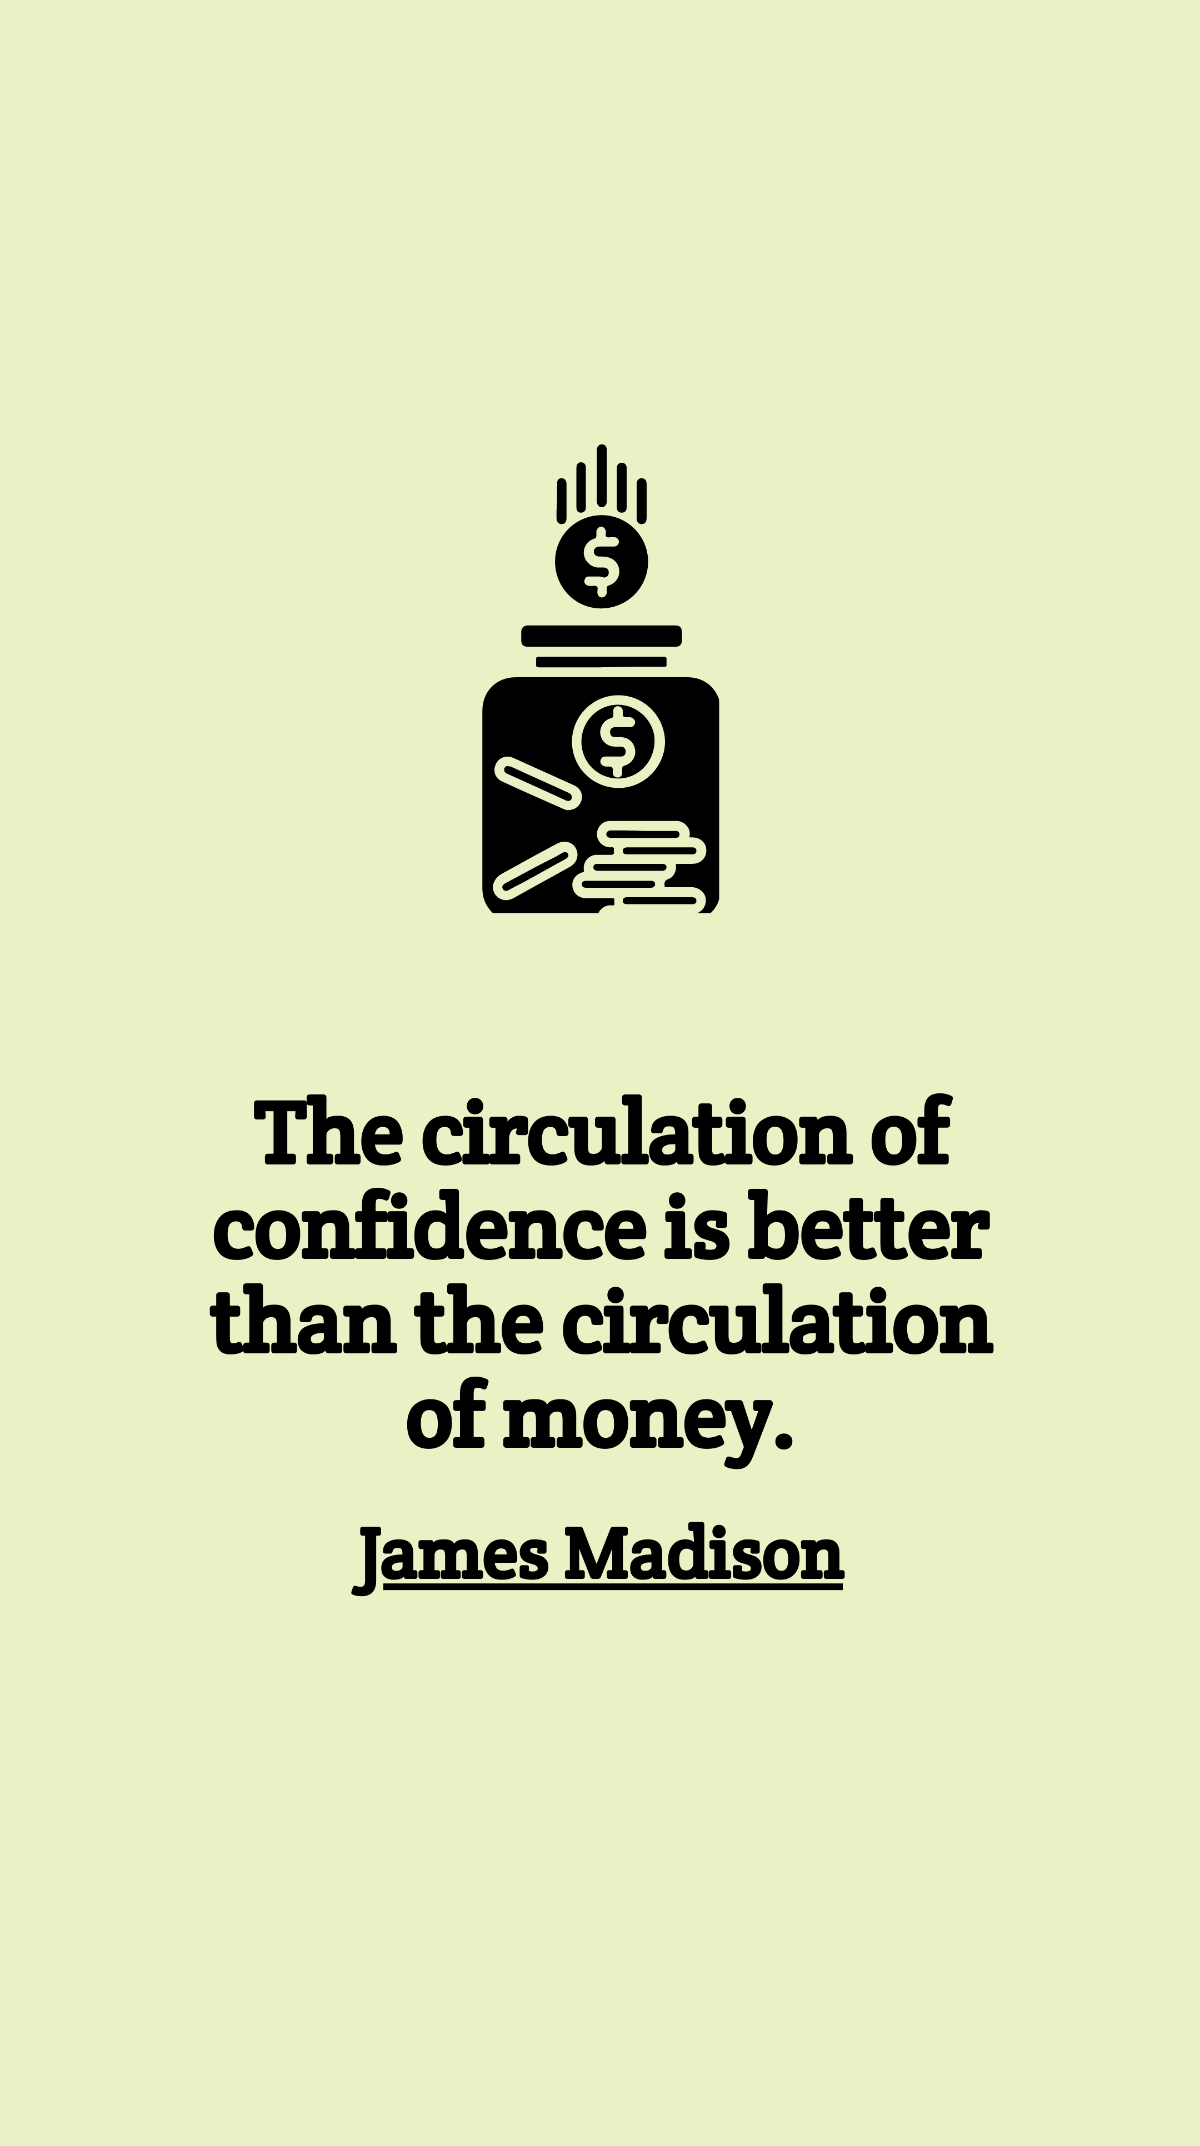 Free James Madison - The circulation of confidence is better than the circulation of money. Template